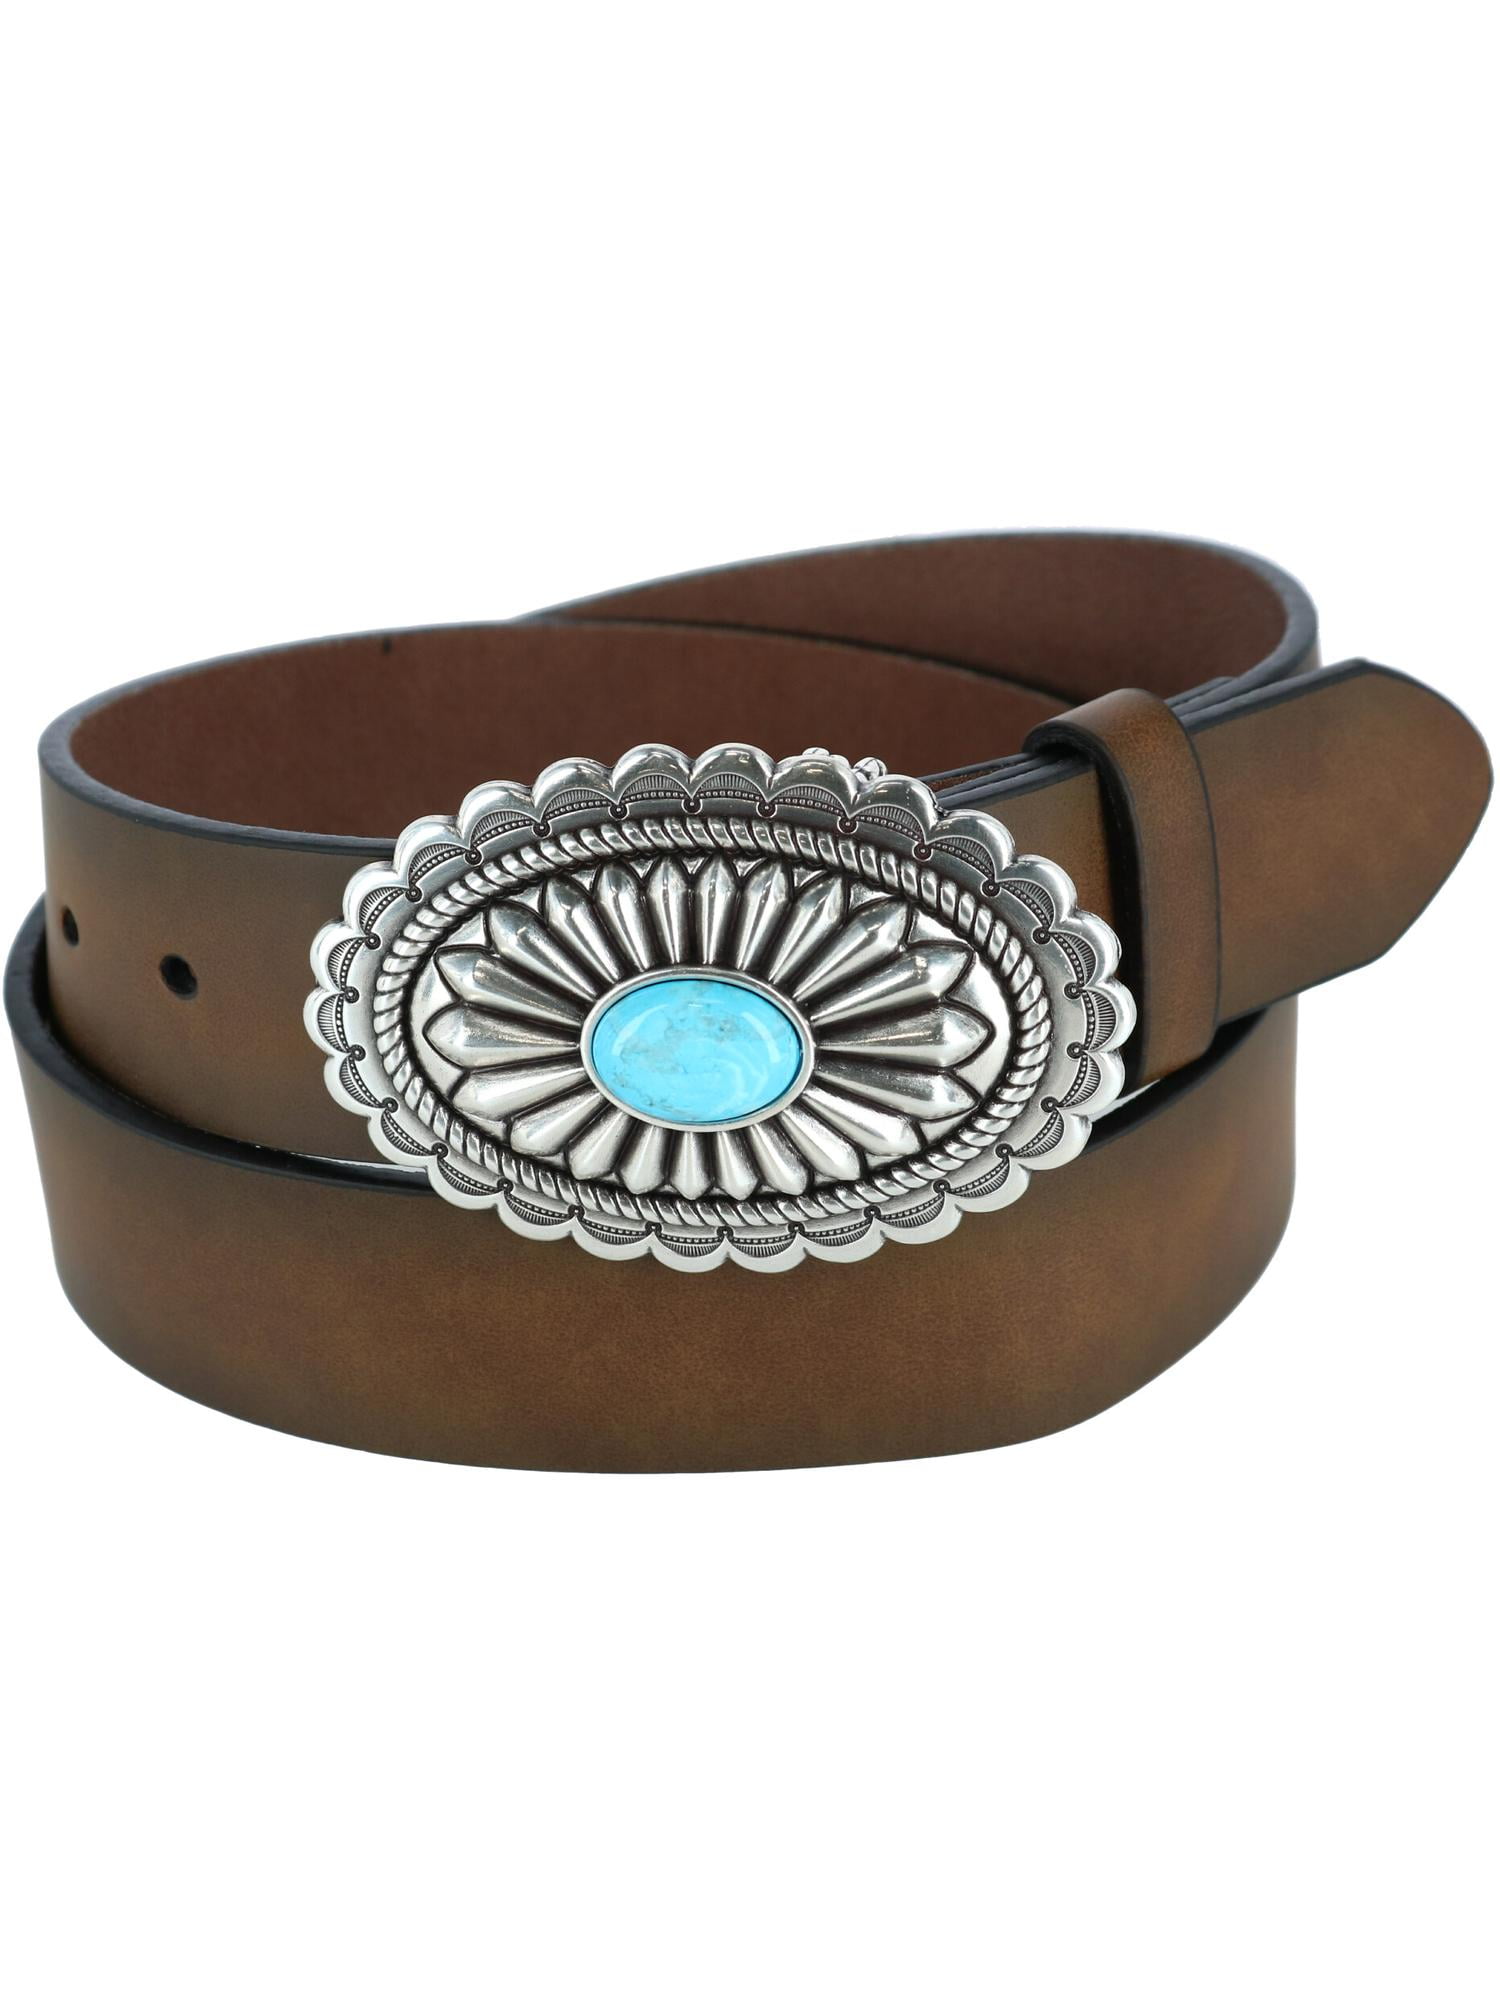 Ariat ARIAT LADIES BROWN BELT WITH ENGRAVED BUCKLE SIZE 26/65 RETAIL $44.99 LEATHER 